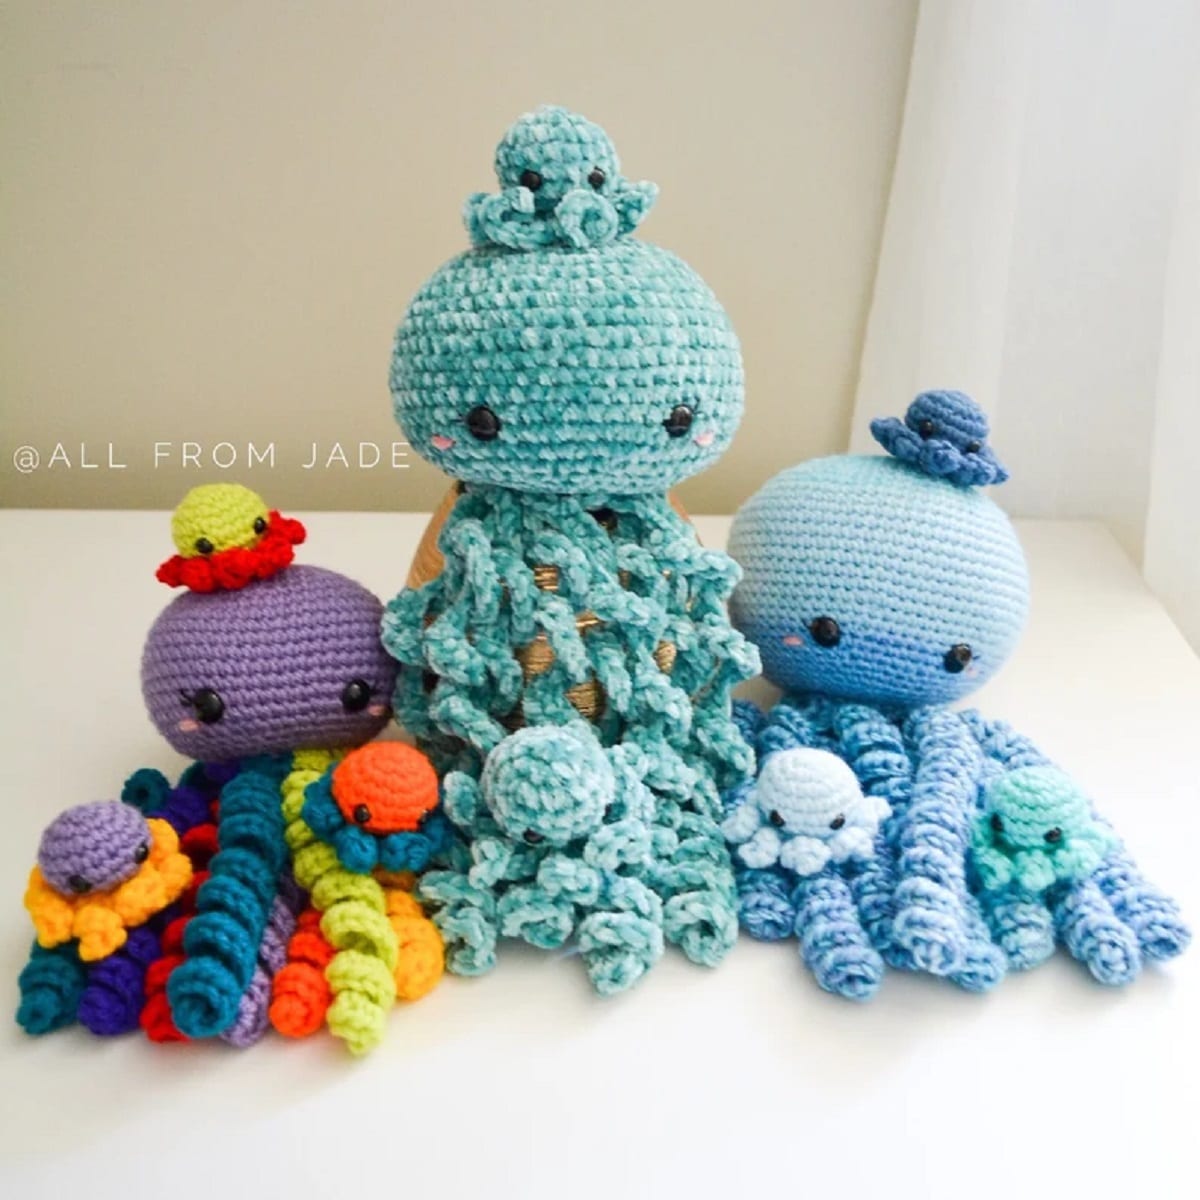 Large textured crochet octopuses in blue and purple with ruffle style tentacles sitting on a white floor with mini octopus babies around them.